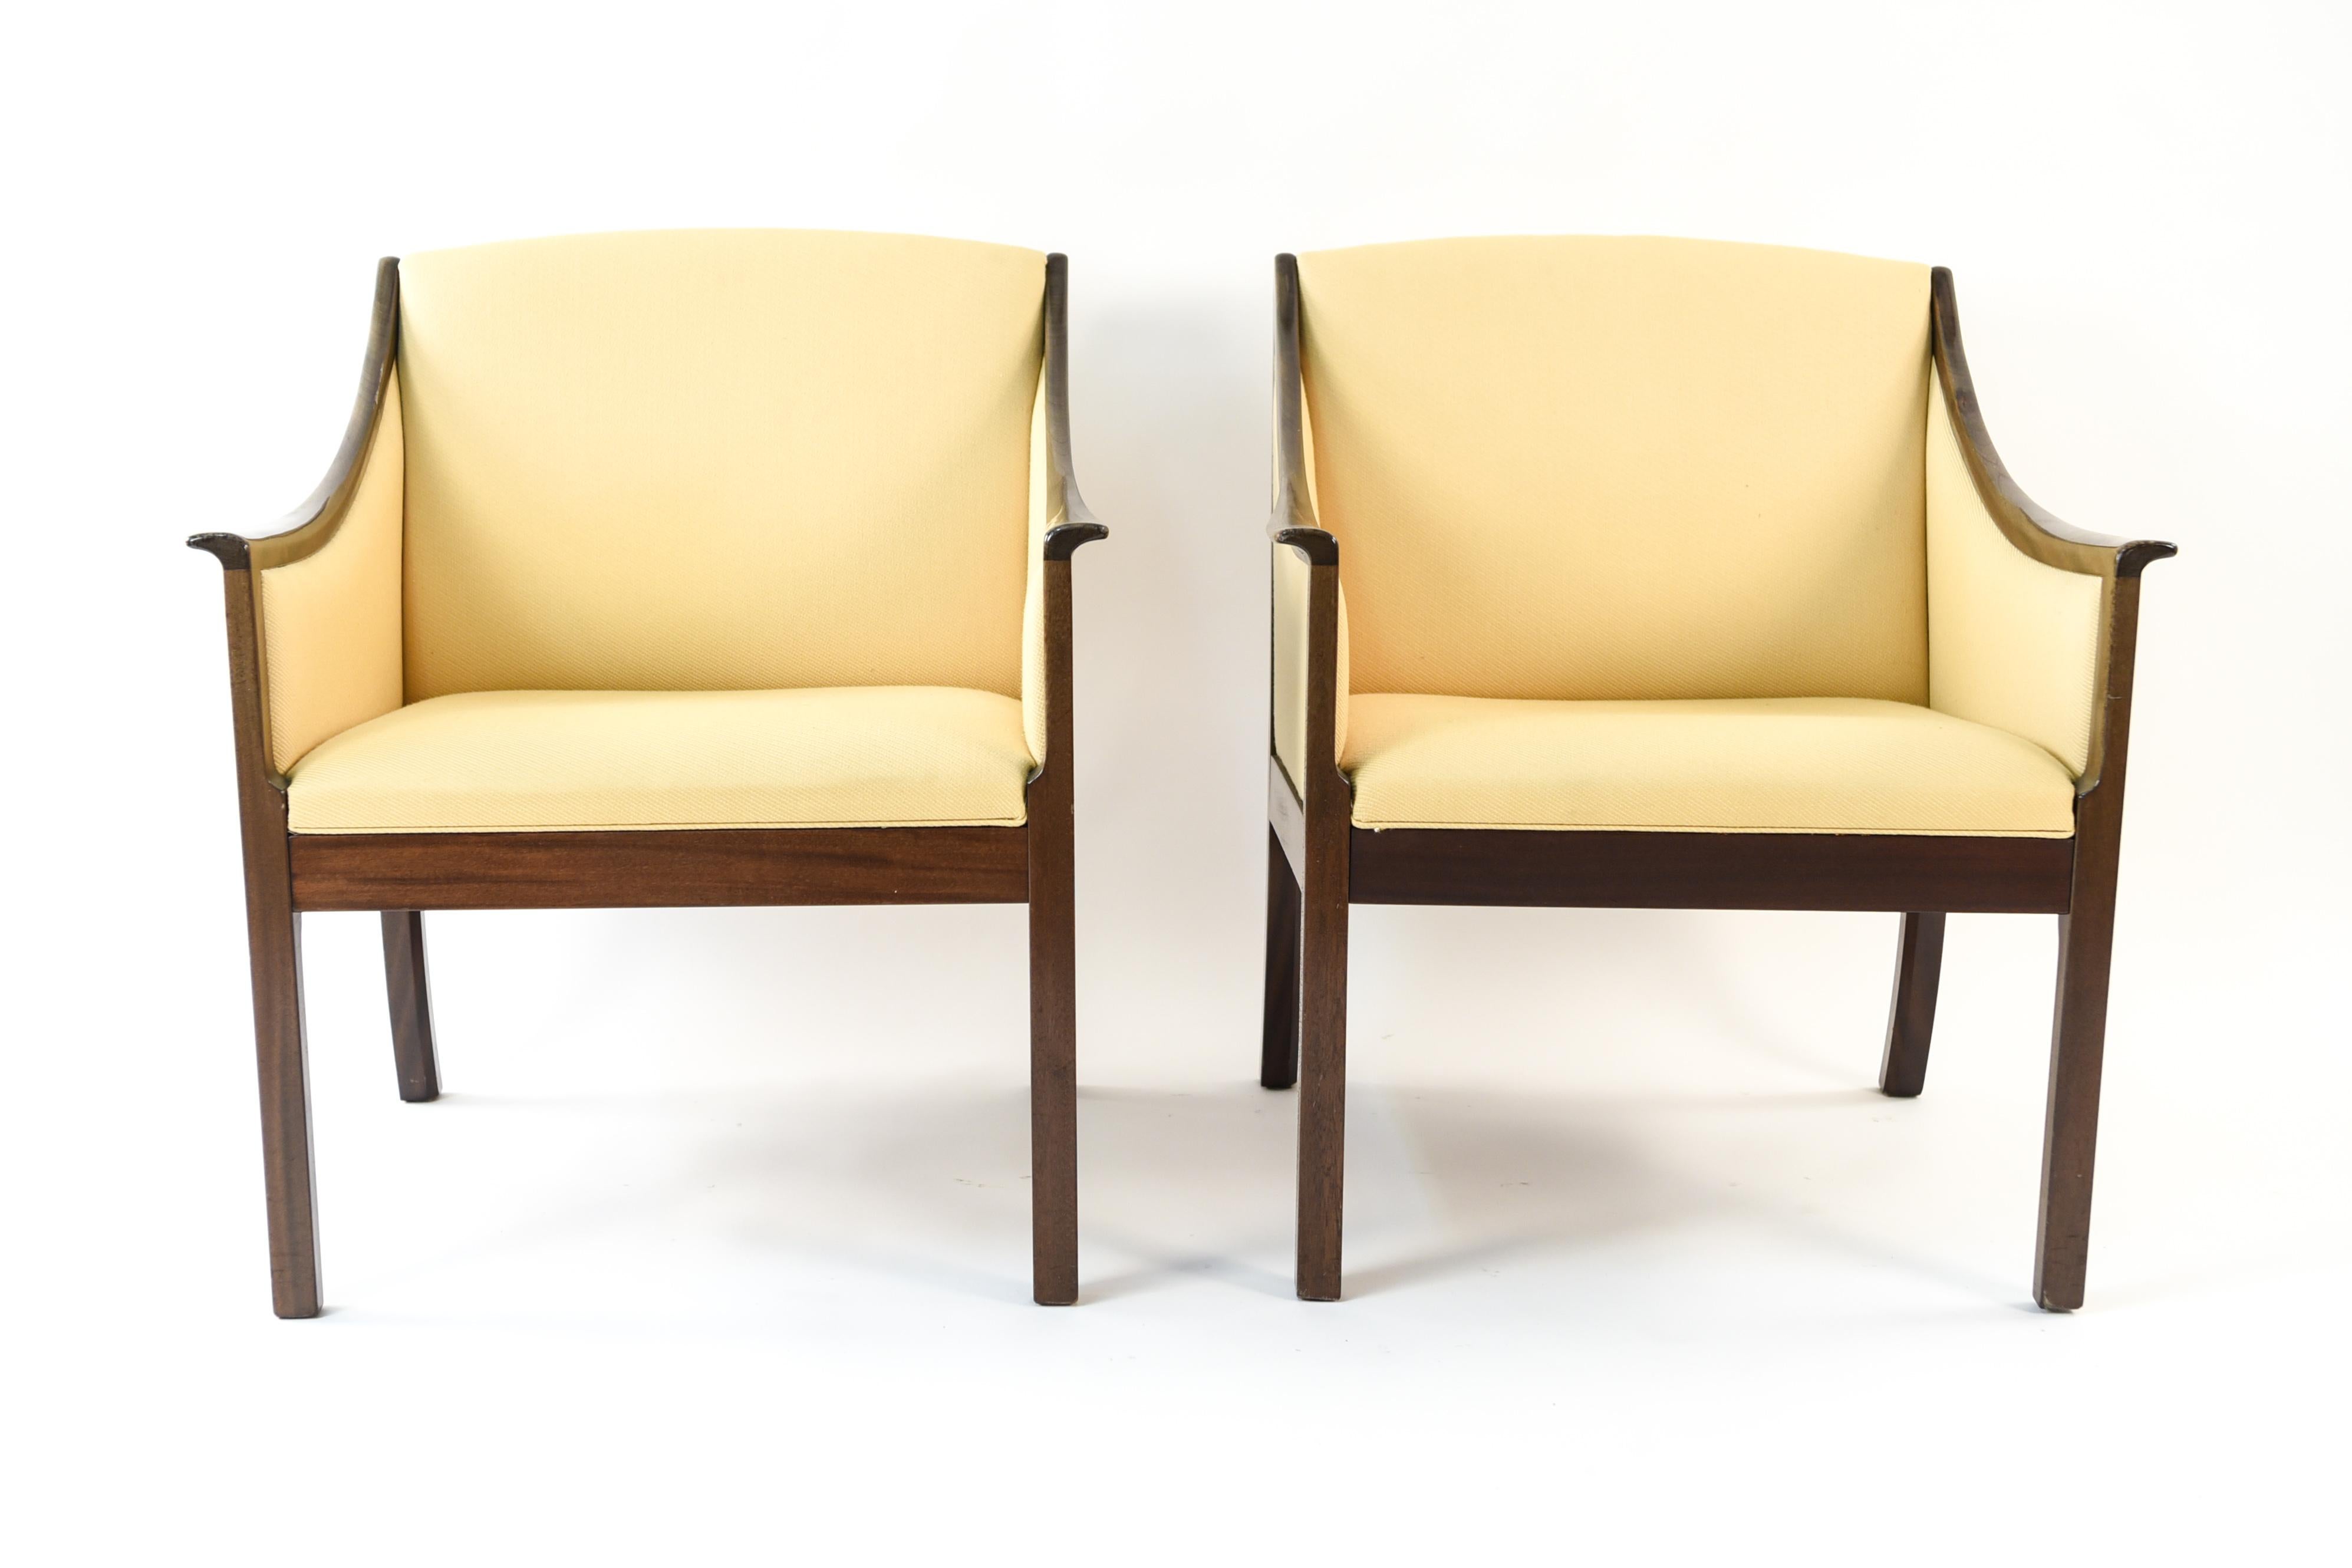 This pair of lounge chairs, circa 1950s was designed by Ole Wanscher for Poul Jeppesen. This pair embodies Ole Wanscher's ability to design furniture that embraces a traditional outlook with a modern twist. Featuring high quality mahogany frames.